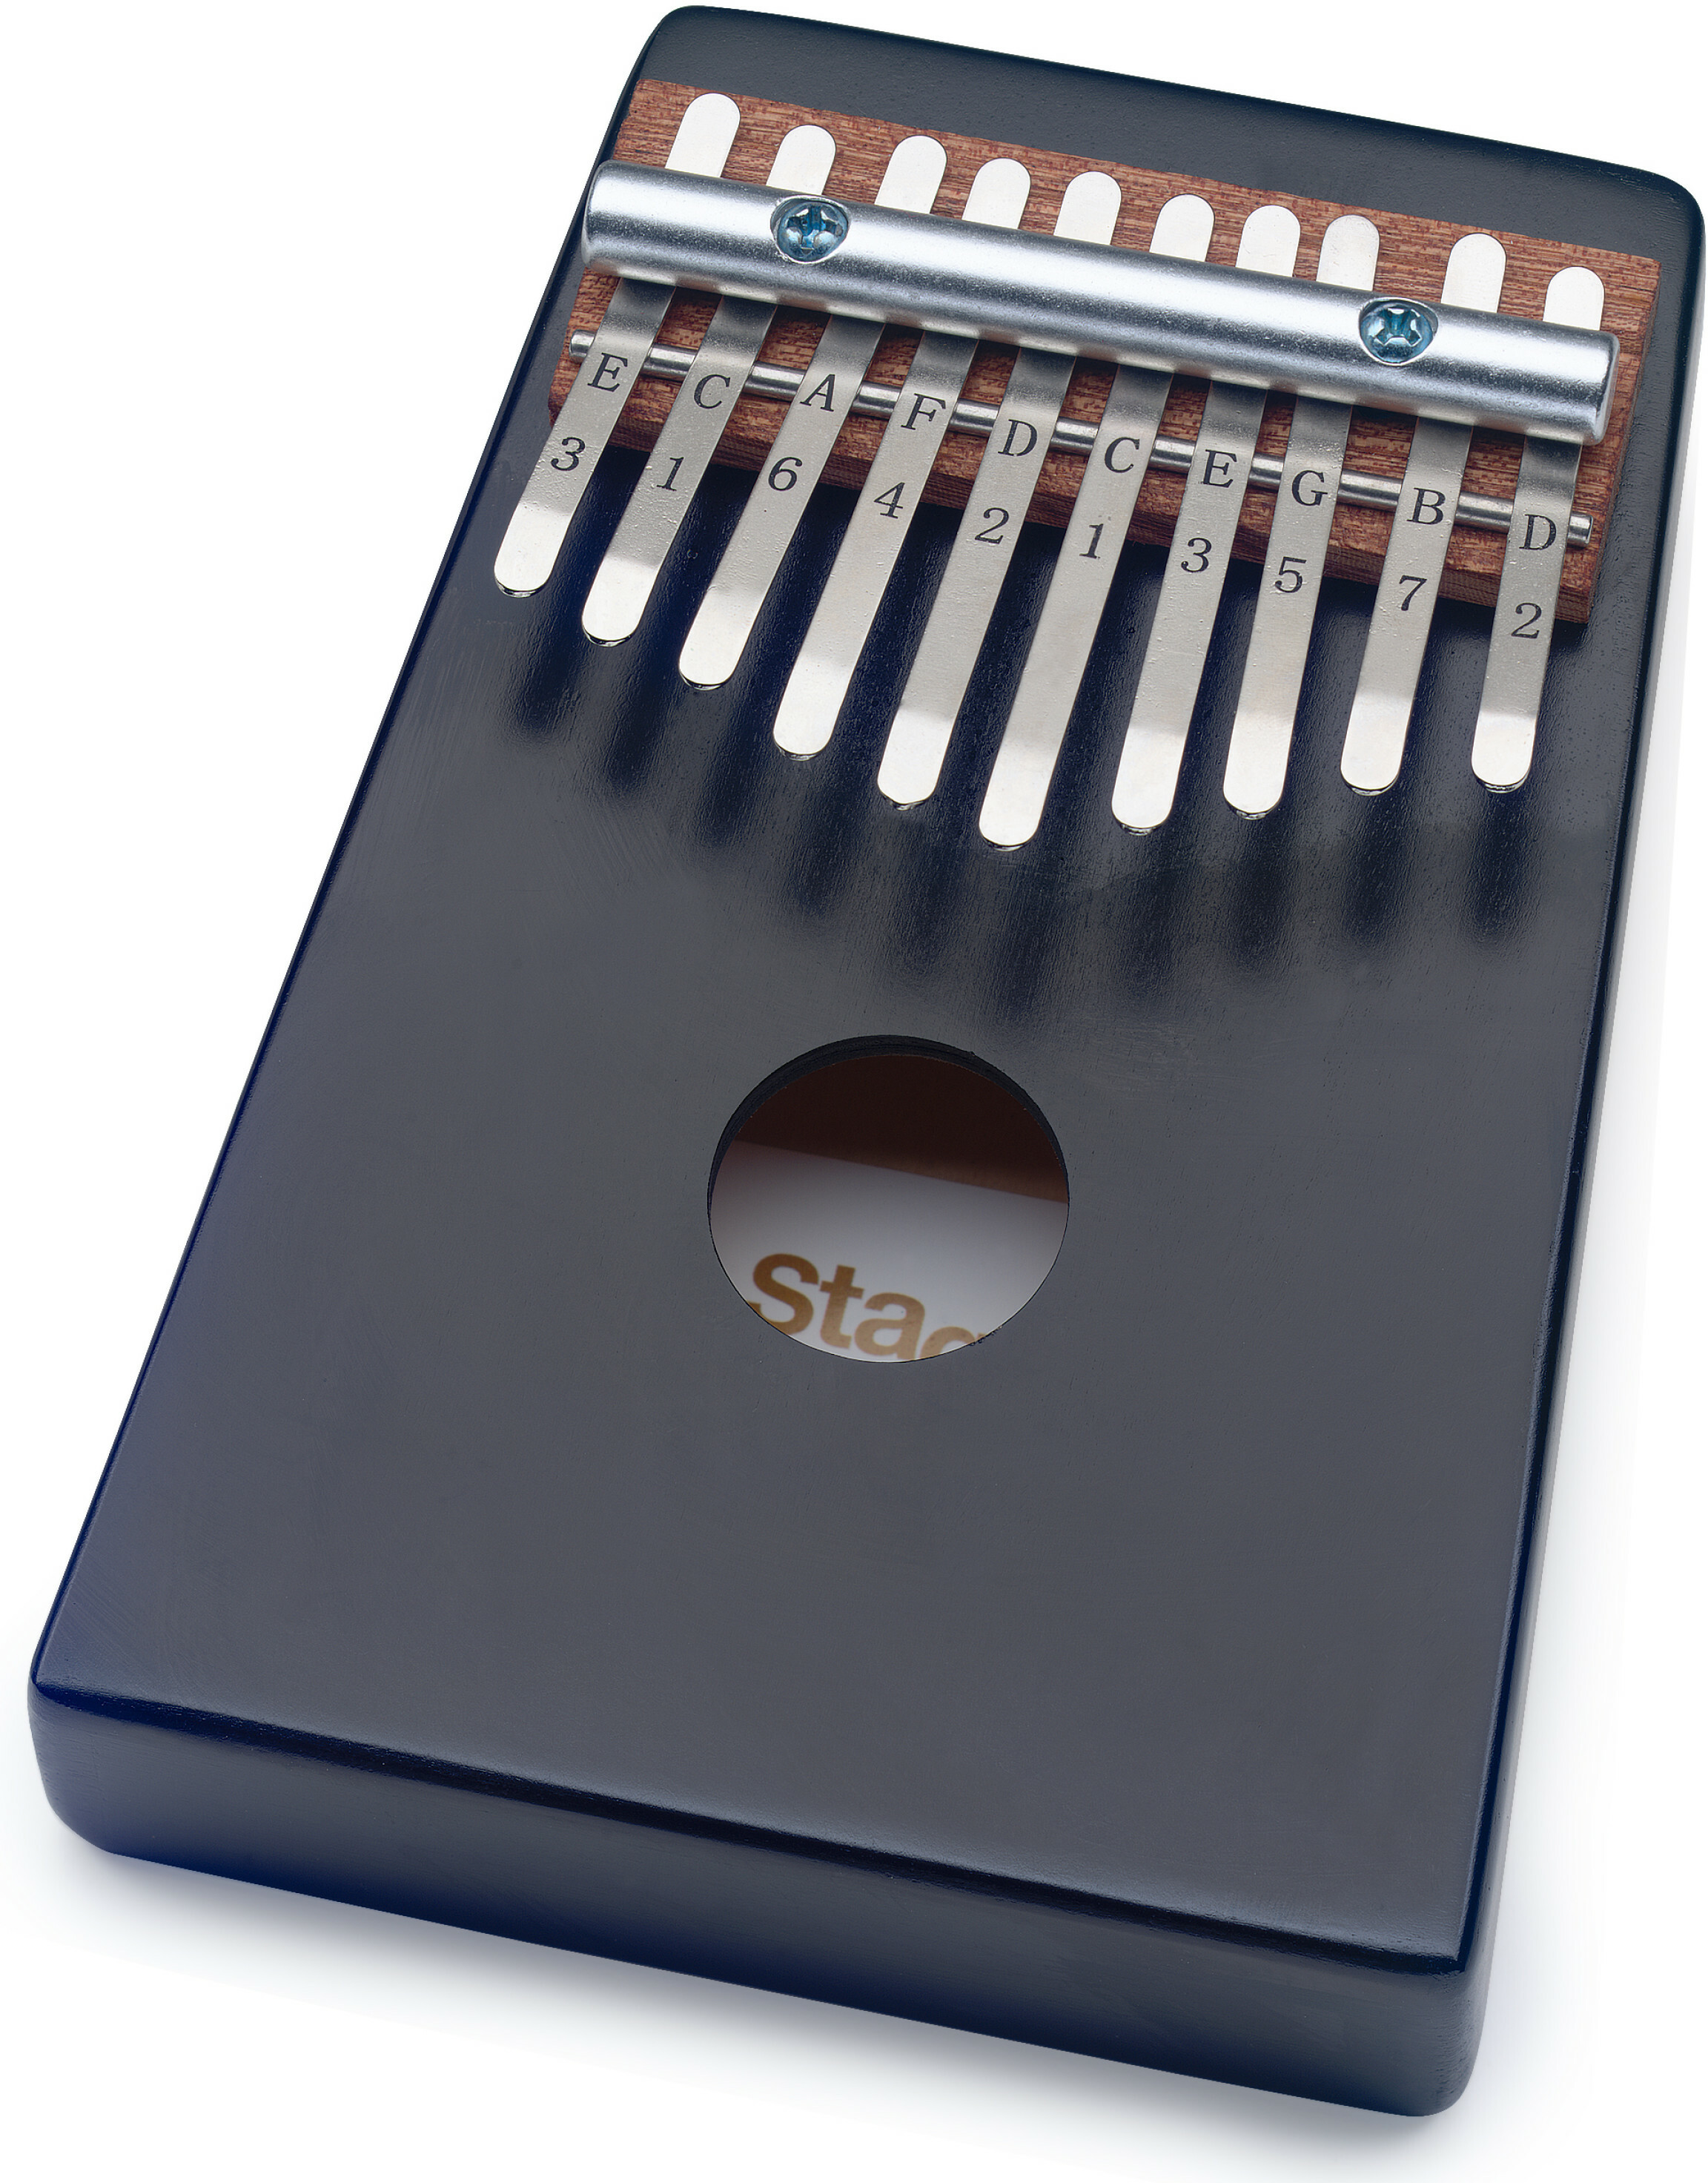 Stagg Kalimba Enfant 10 Notes Noir - Hit percussion - Main picture